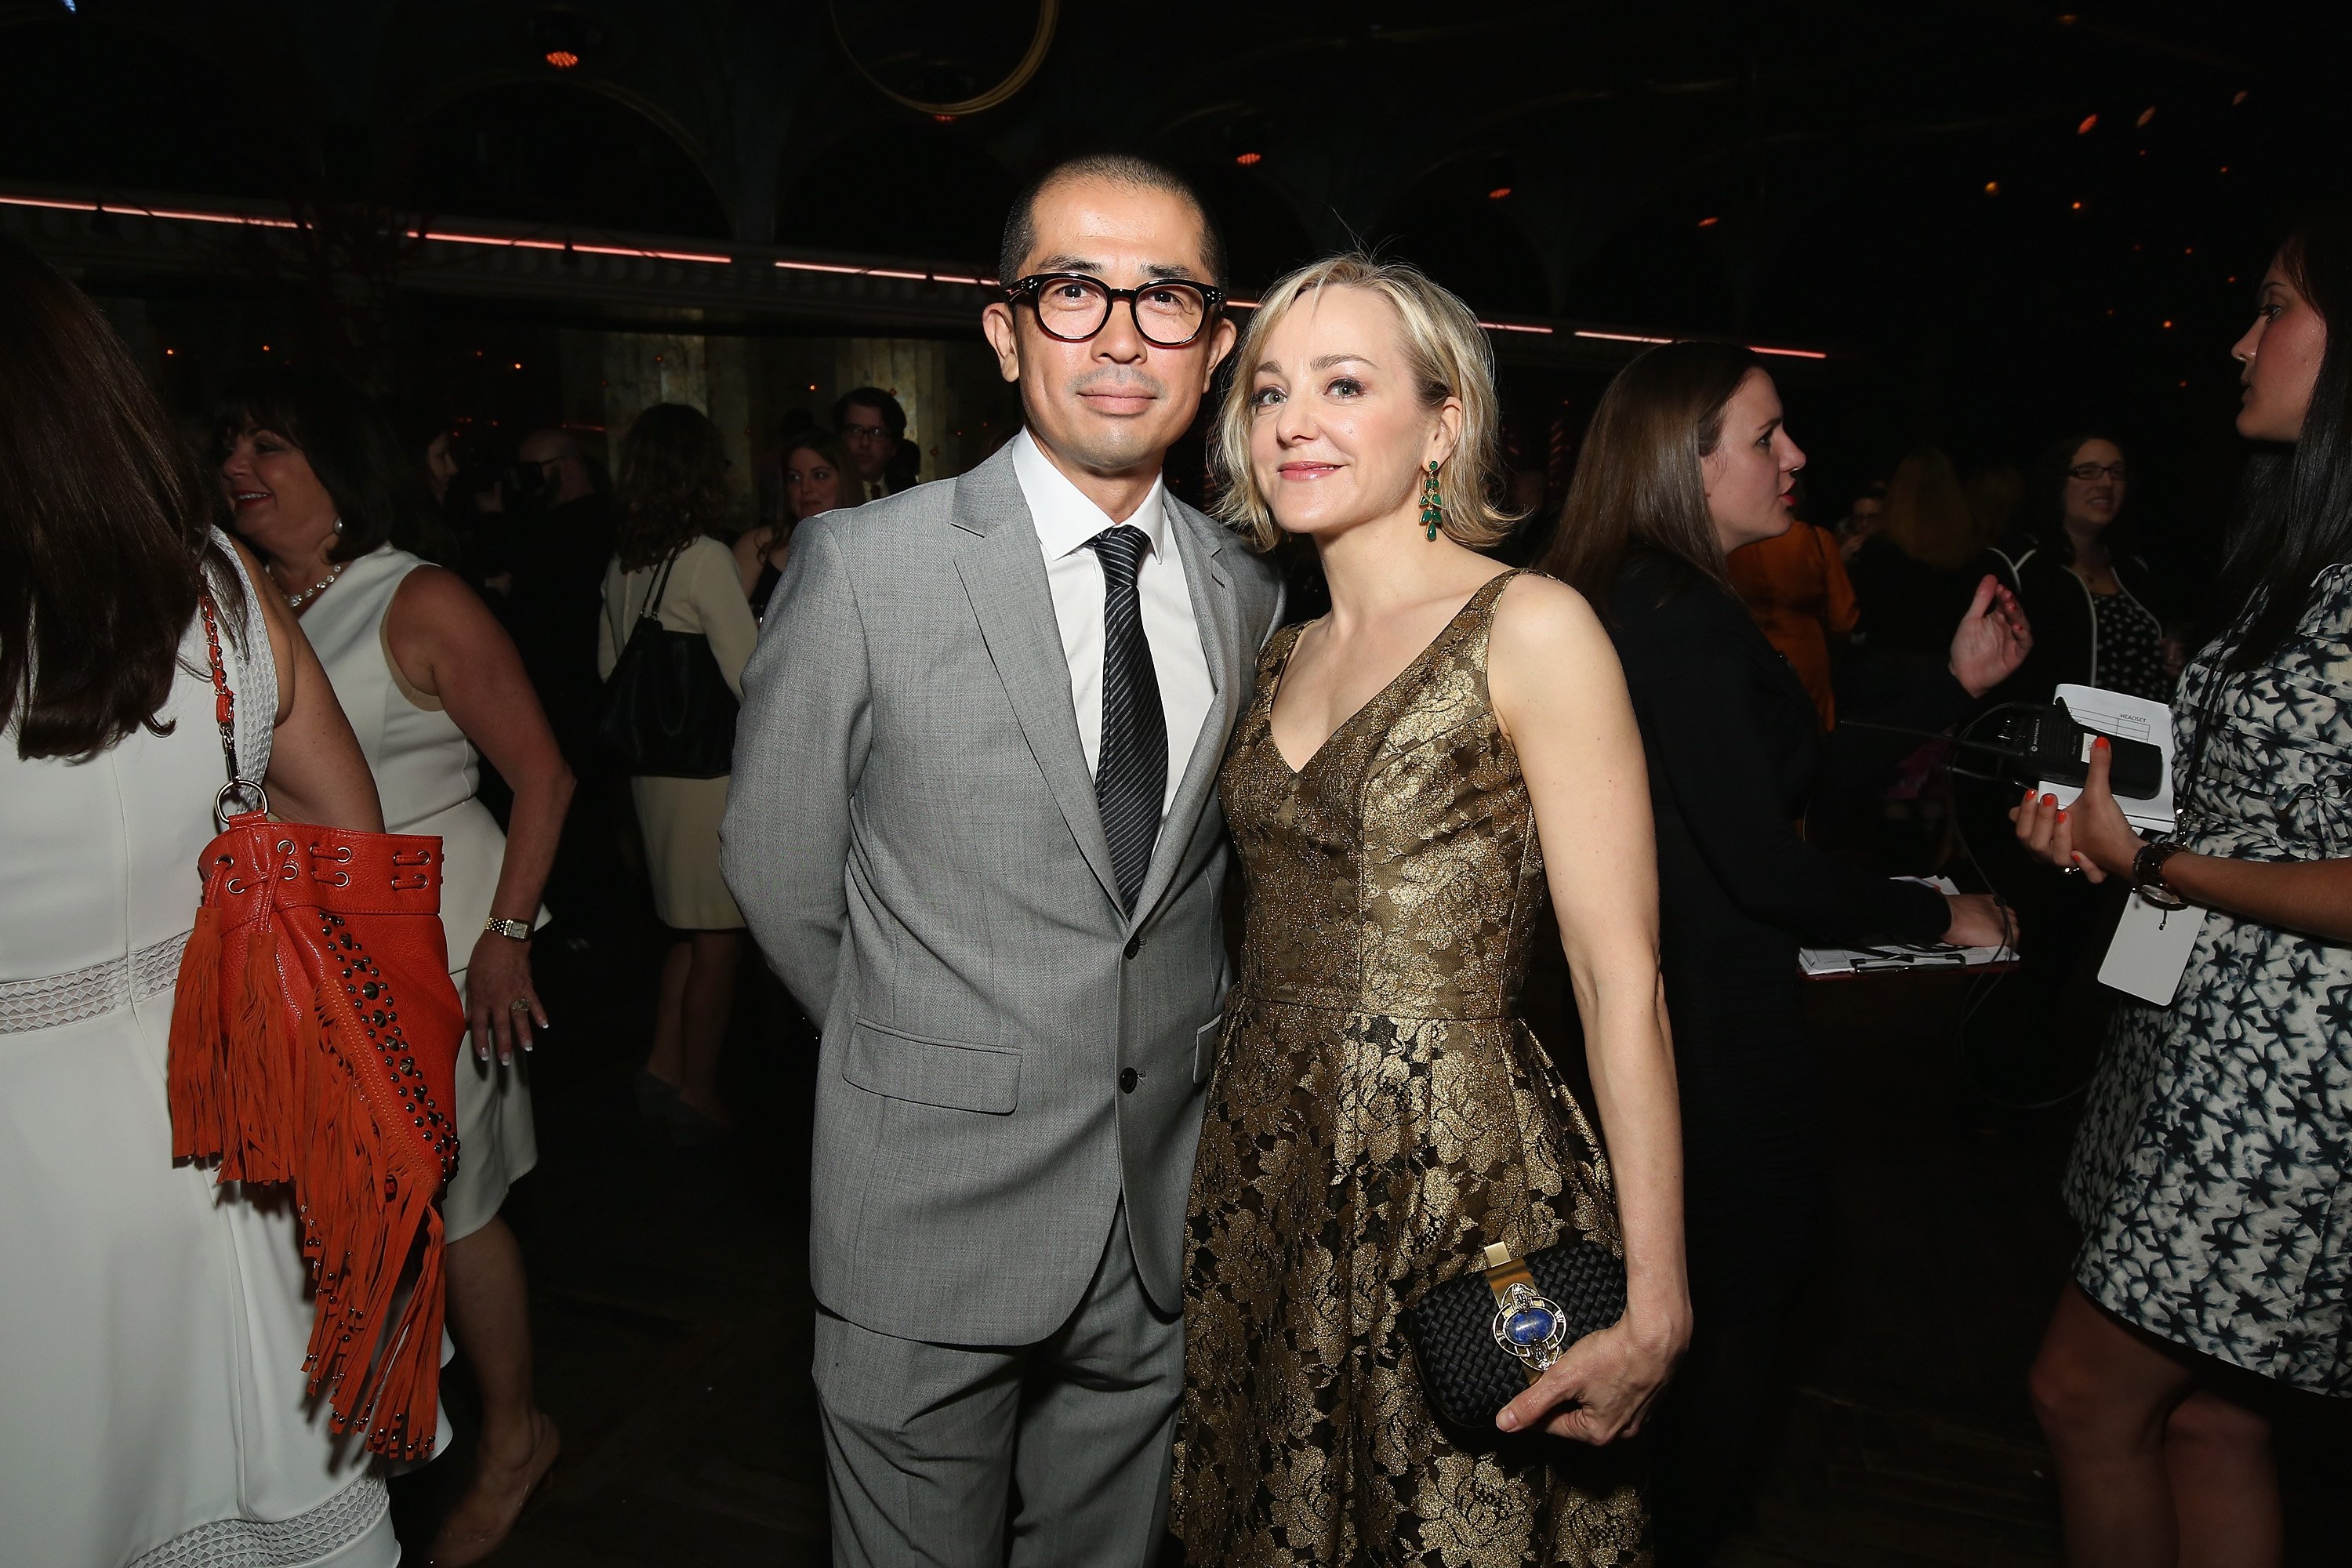 Geneva Carr and Yuji Yamazaki attend the 2015 Tony Honors Cocktail Party at Diamond Horseshoe at the Paramount Hotel on June 1, 2015 in New York City. | Source: Getty Images.